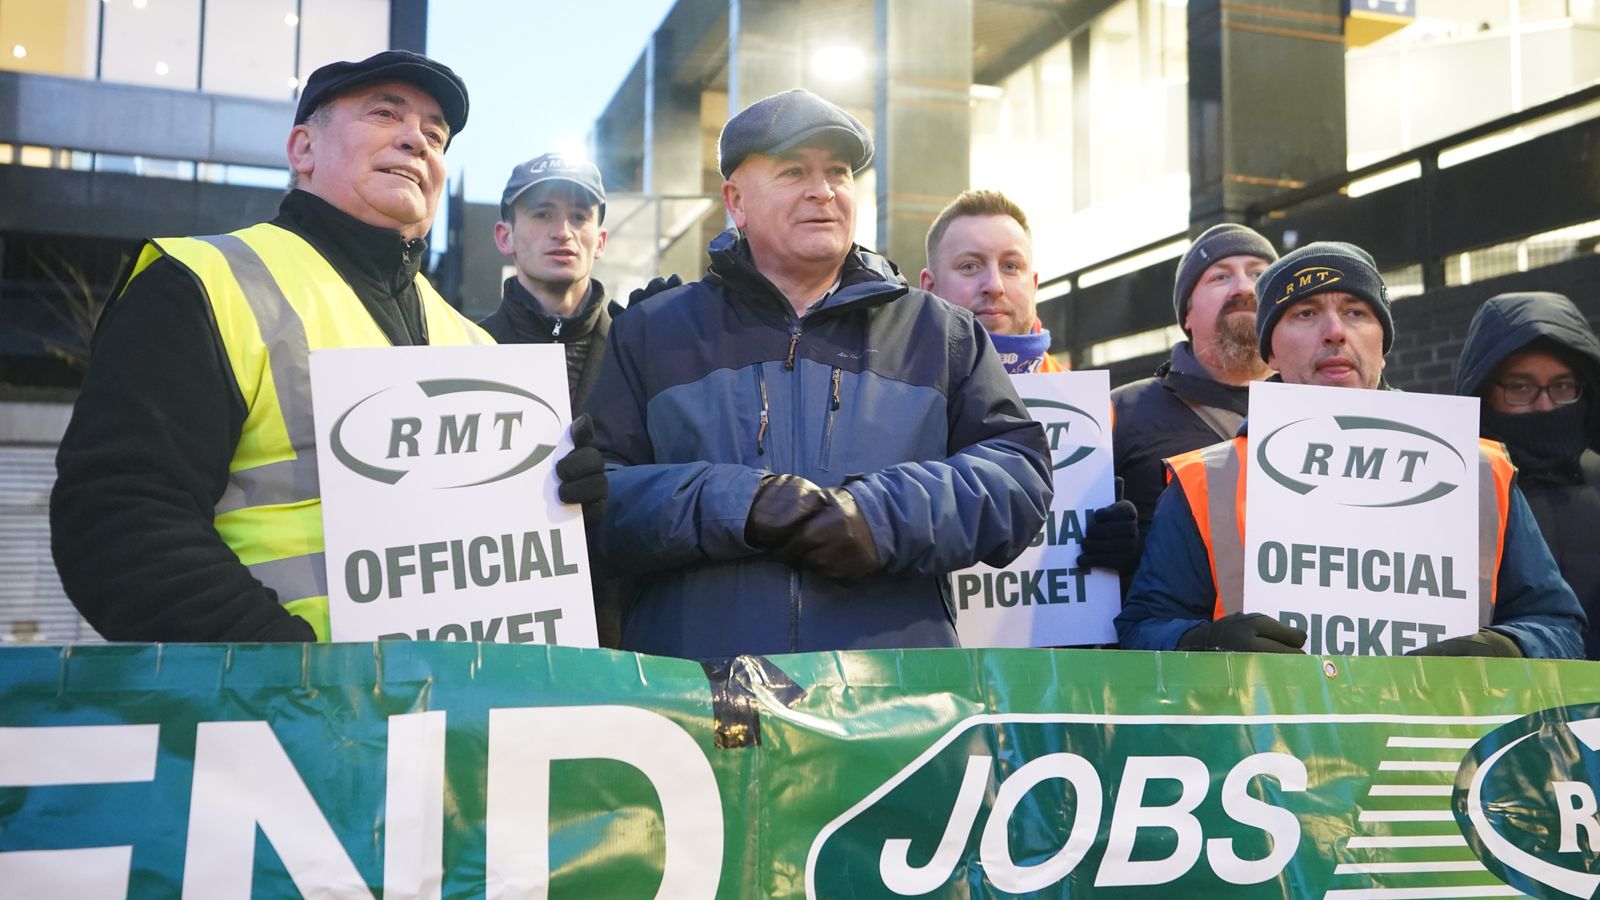 Rail strikes: Pay deal 'achievable' between train companies and unions, RMT boss Mick Lynch says